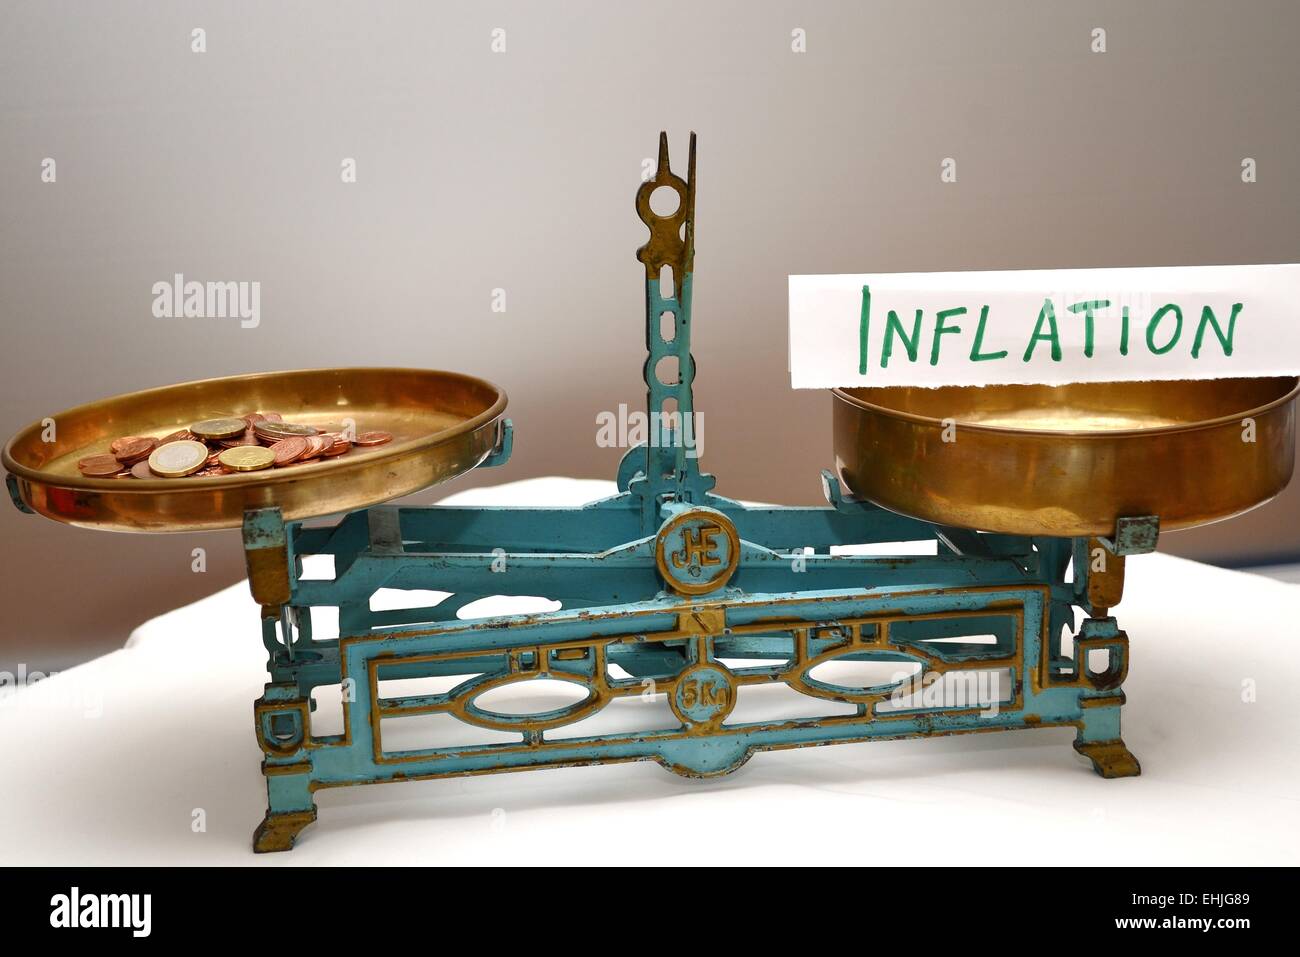 inflation Stock Photo